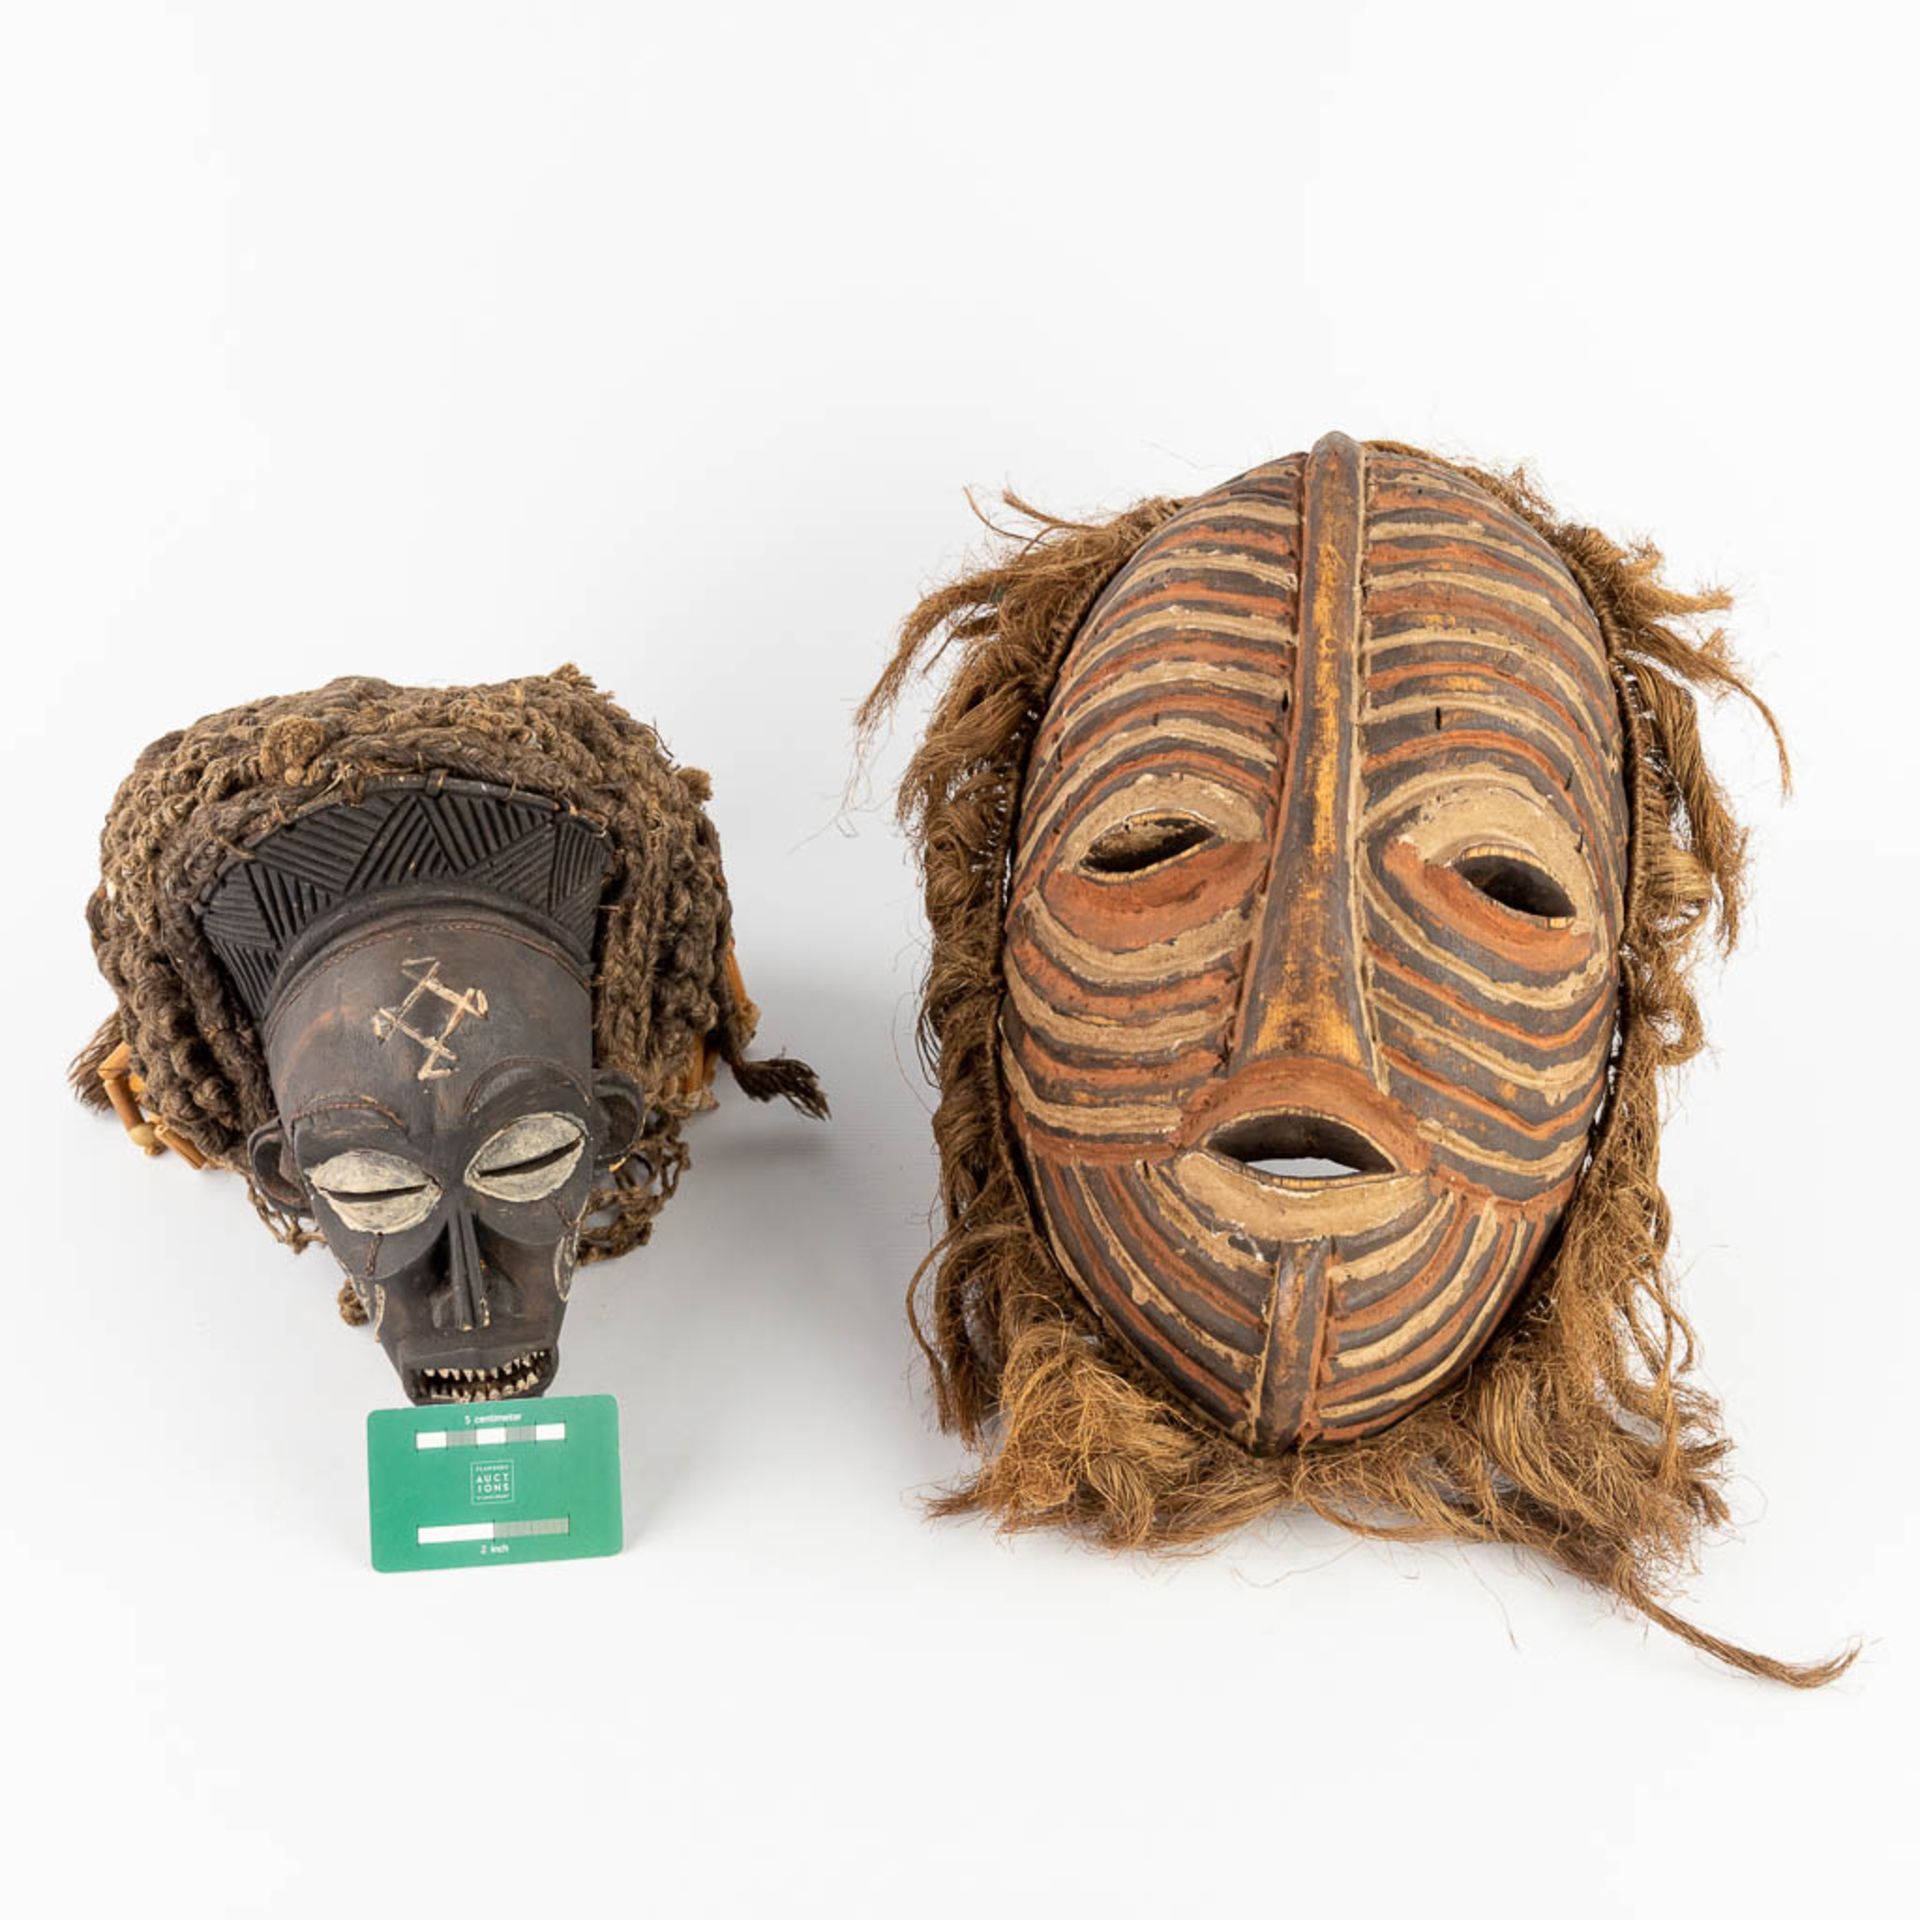 A collection of 2 African masks 'Chokwe' and 'Luba Songye'. (L: 13 x W: 24 x H: 43 cm) - Image 2 of 21